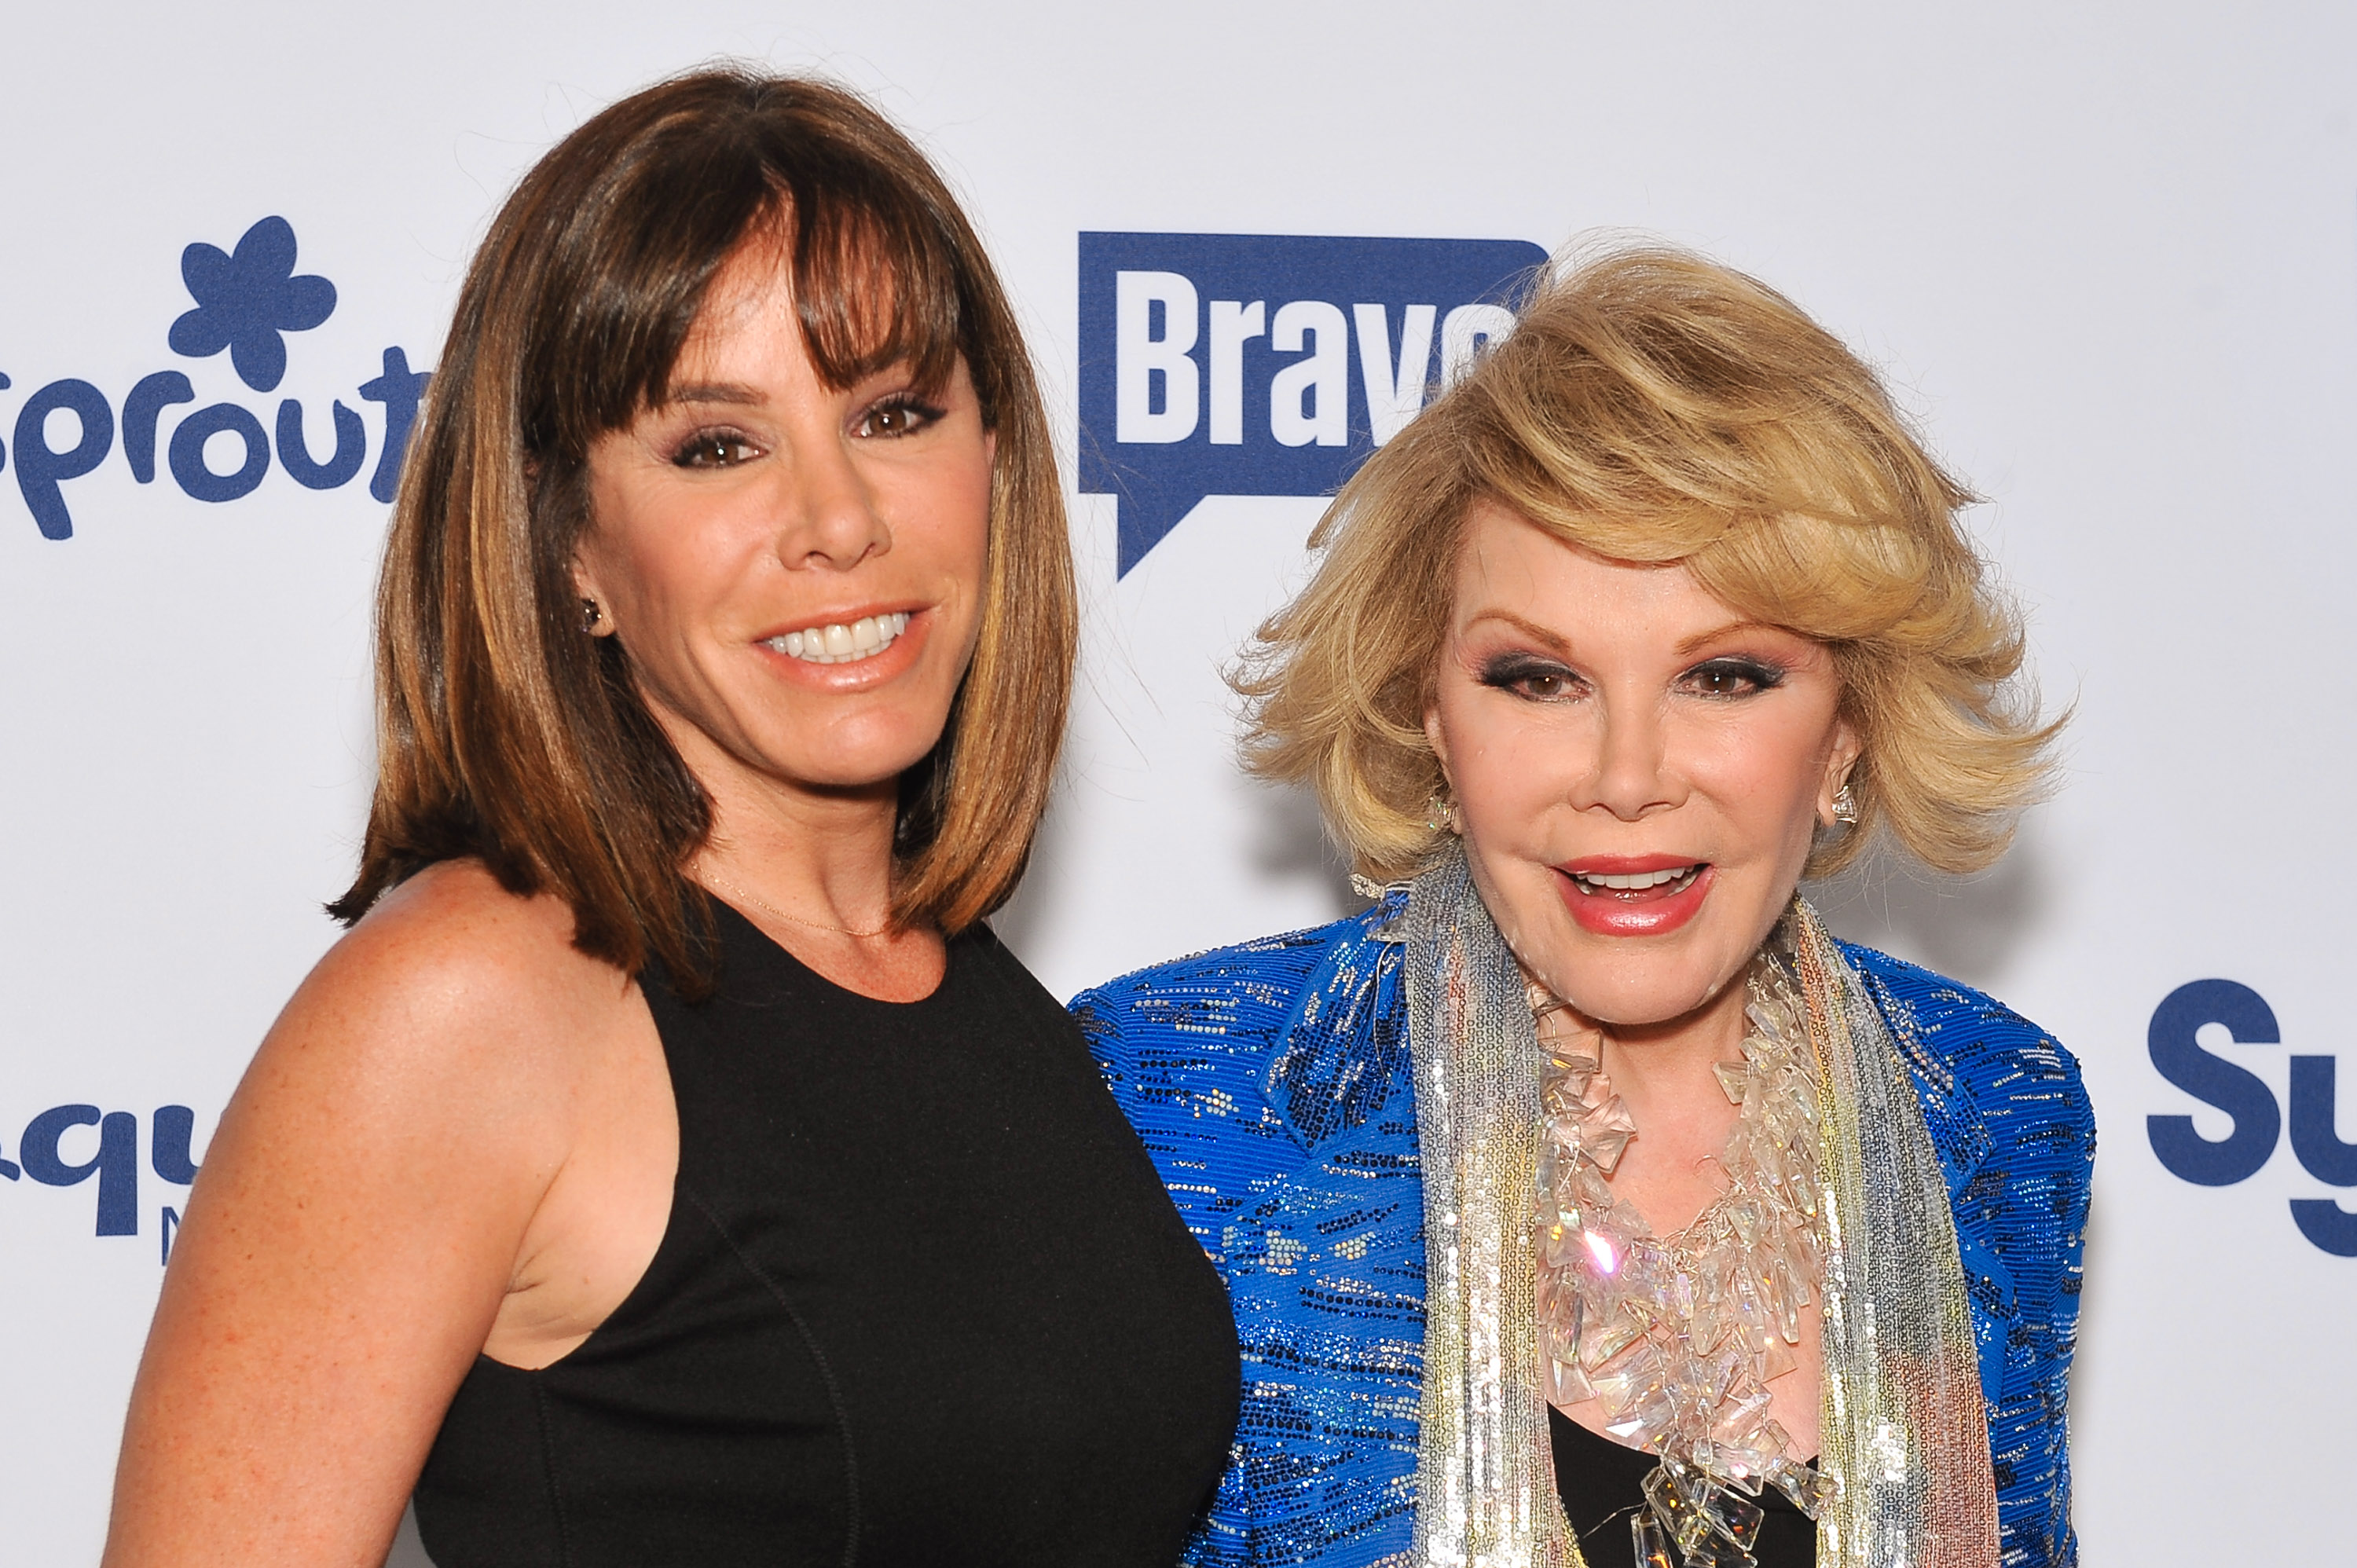 Joan Rivers and Melissa Rivers attend the 2014 NBCUniversal Cable Entertainment Upfronts in New York City, on May 15, 2014. | Source: Getty Images